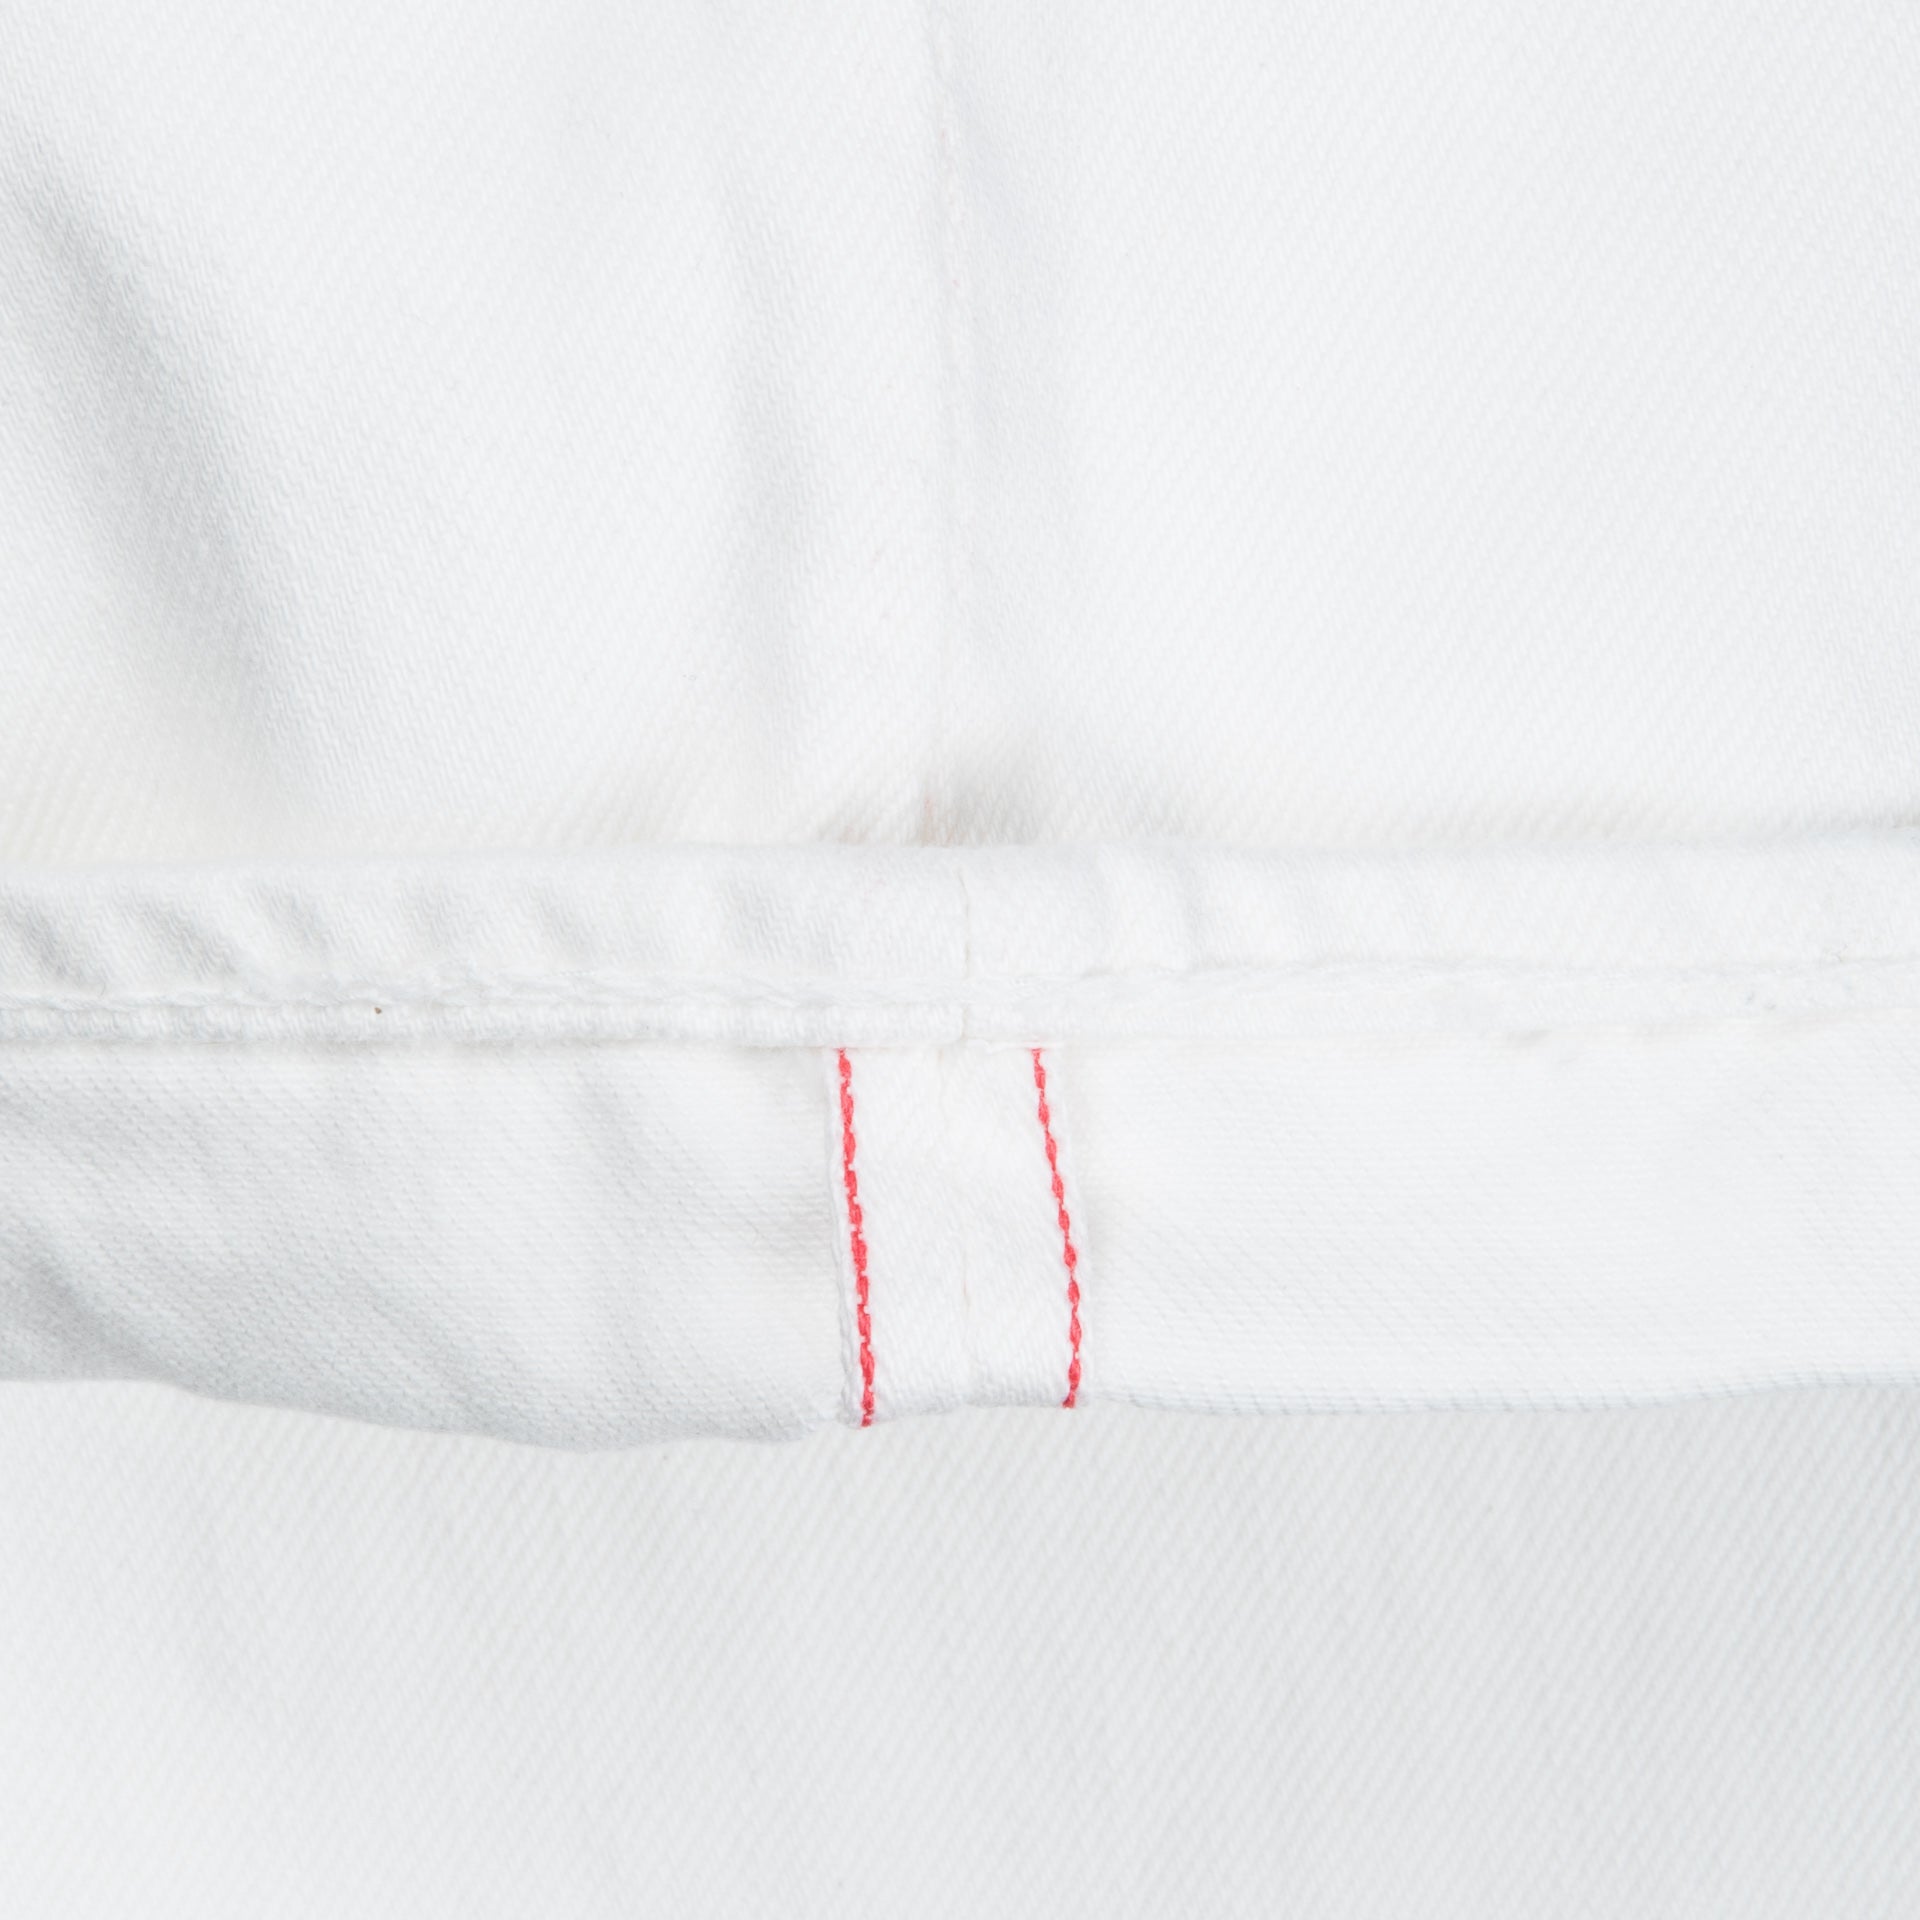 Orslow x Frans Boone Exclusive White Selvedge Denim Model 107 Ivy Fit